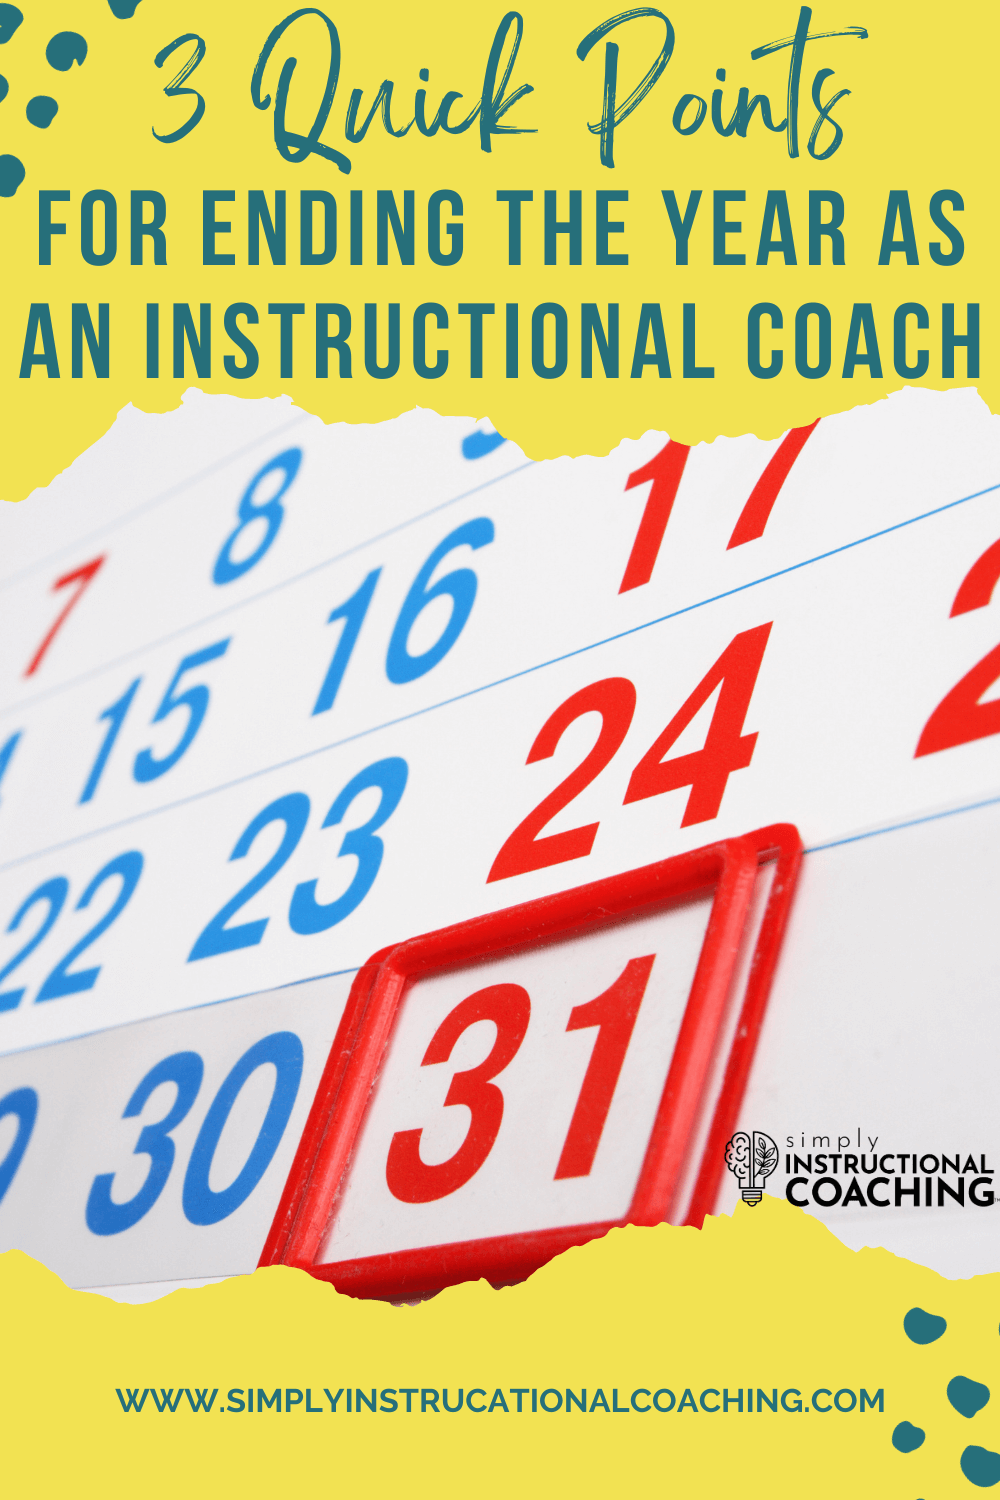 Three quick points for ending the year as an instructional coach